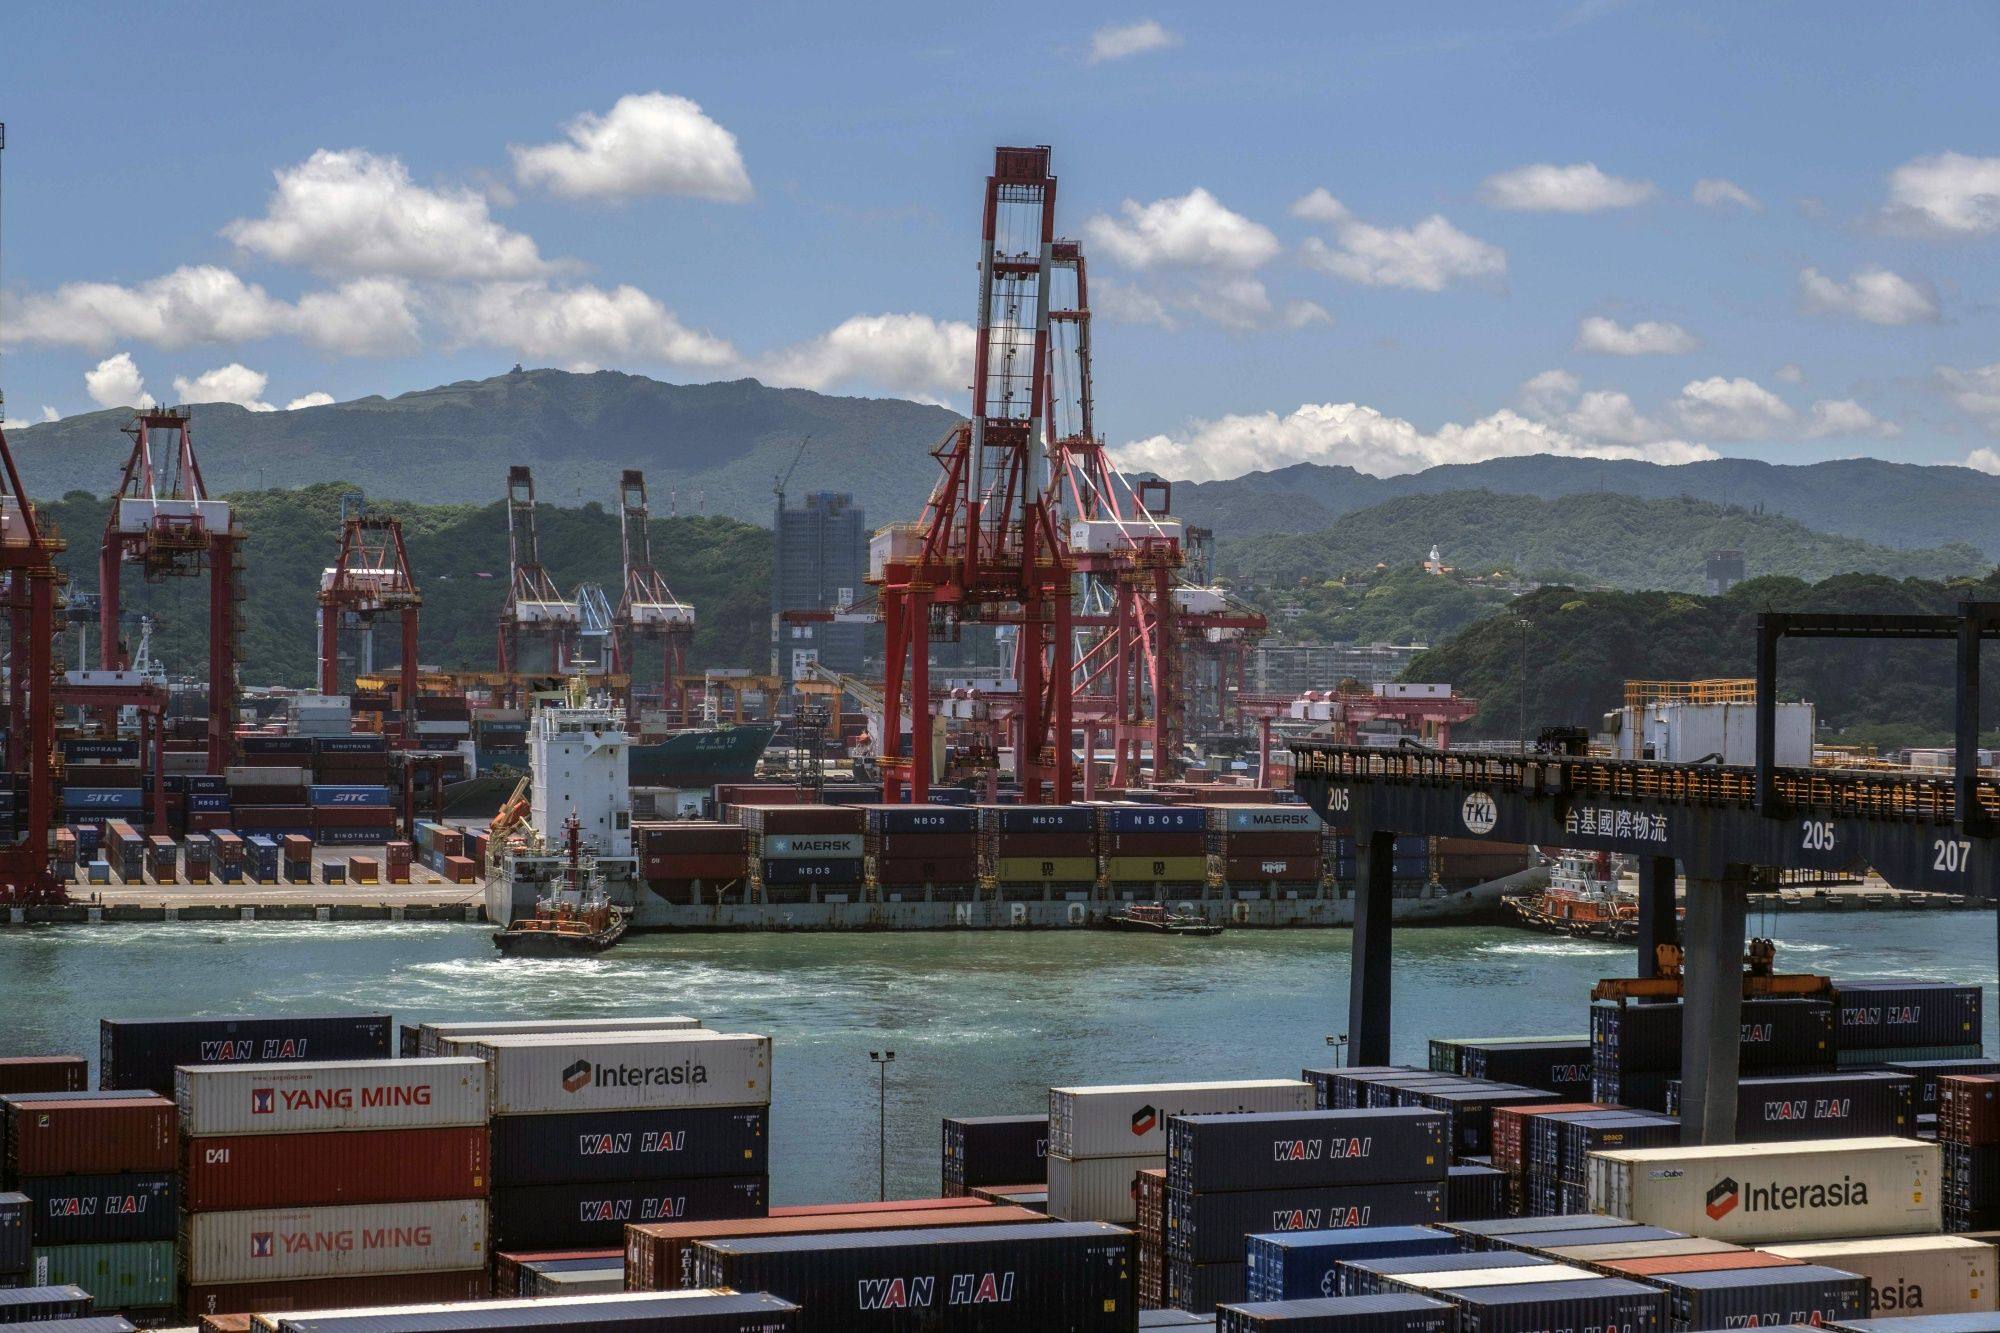 The Port of Keelung, Taiwan, is seen on Thursday after China kicked off live-fire military exercises that are affecting transport routes. Photo: Bloomberg